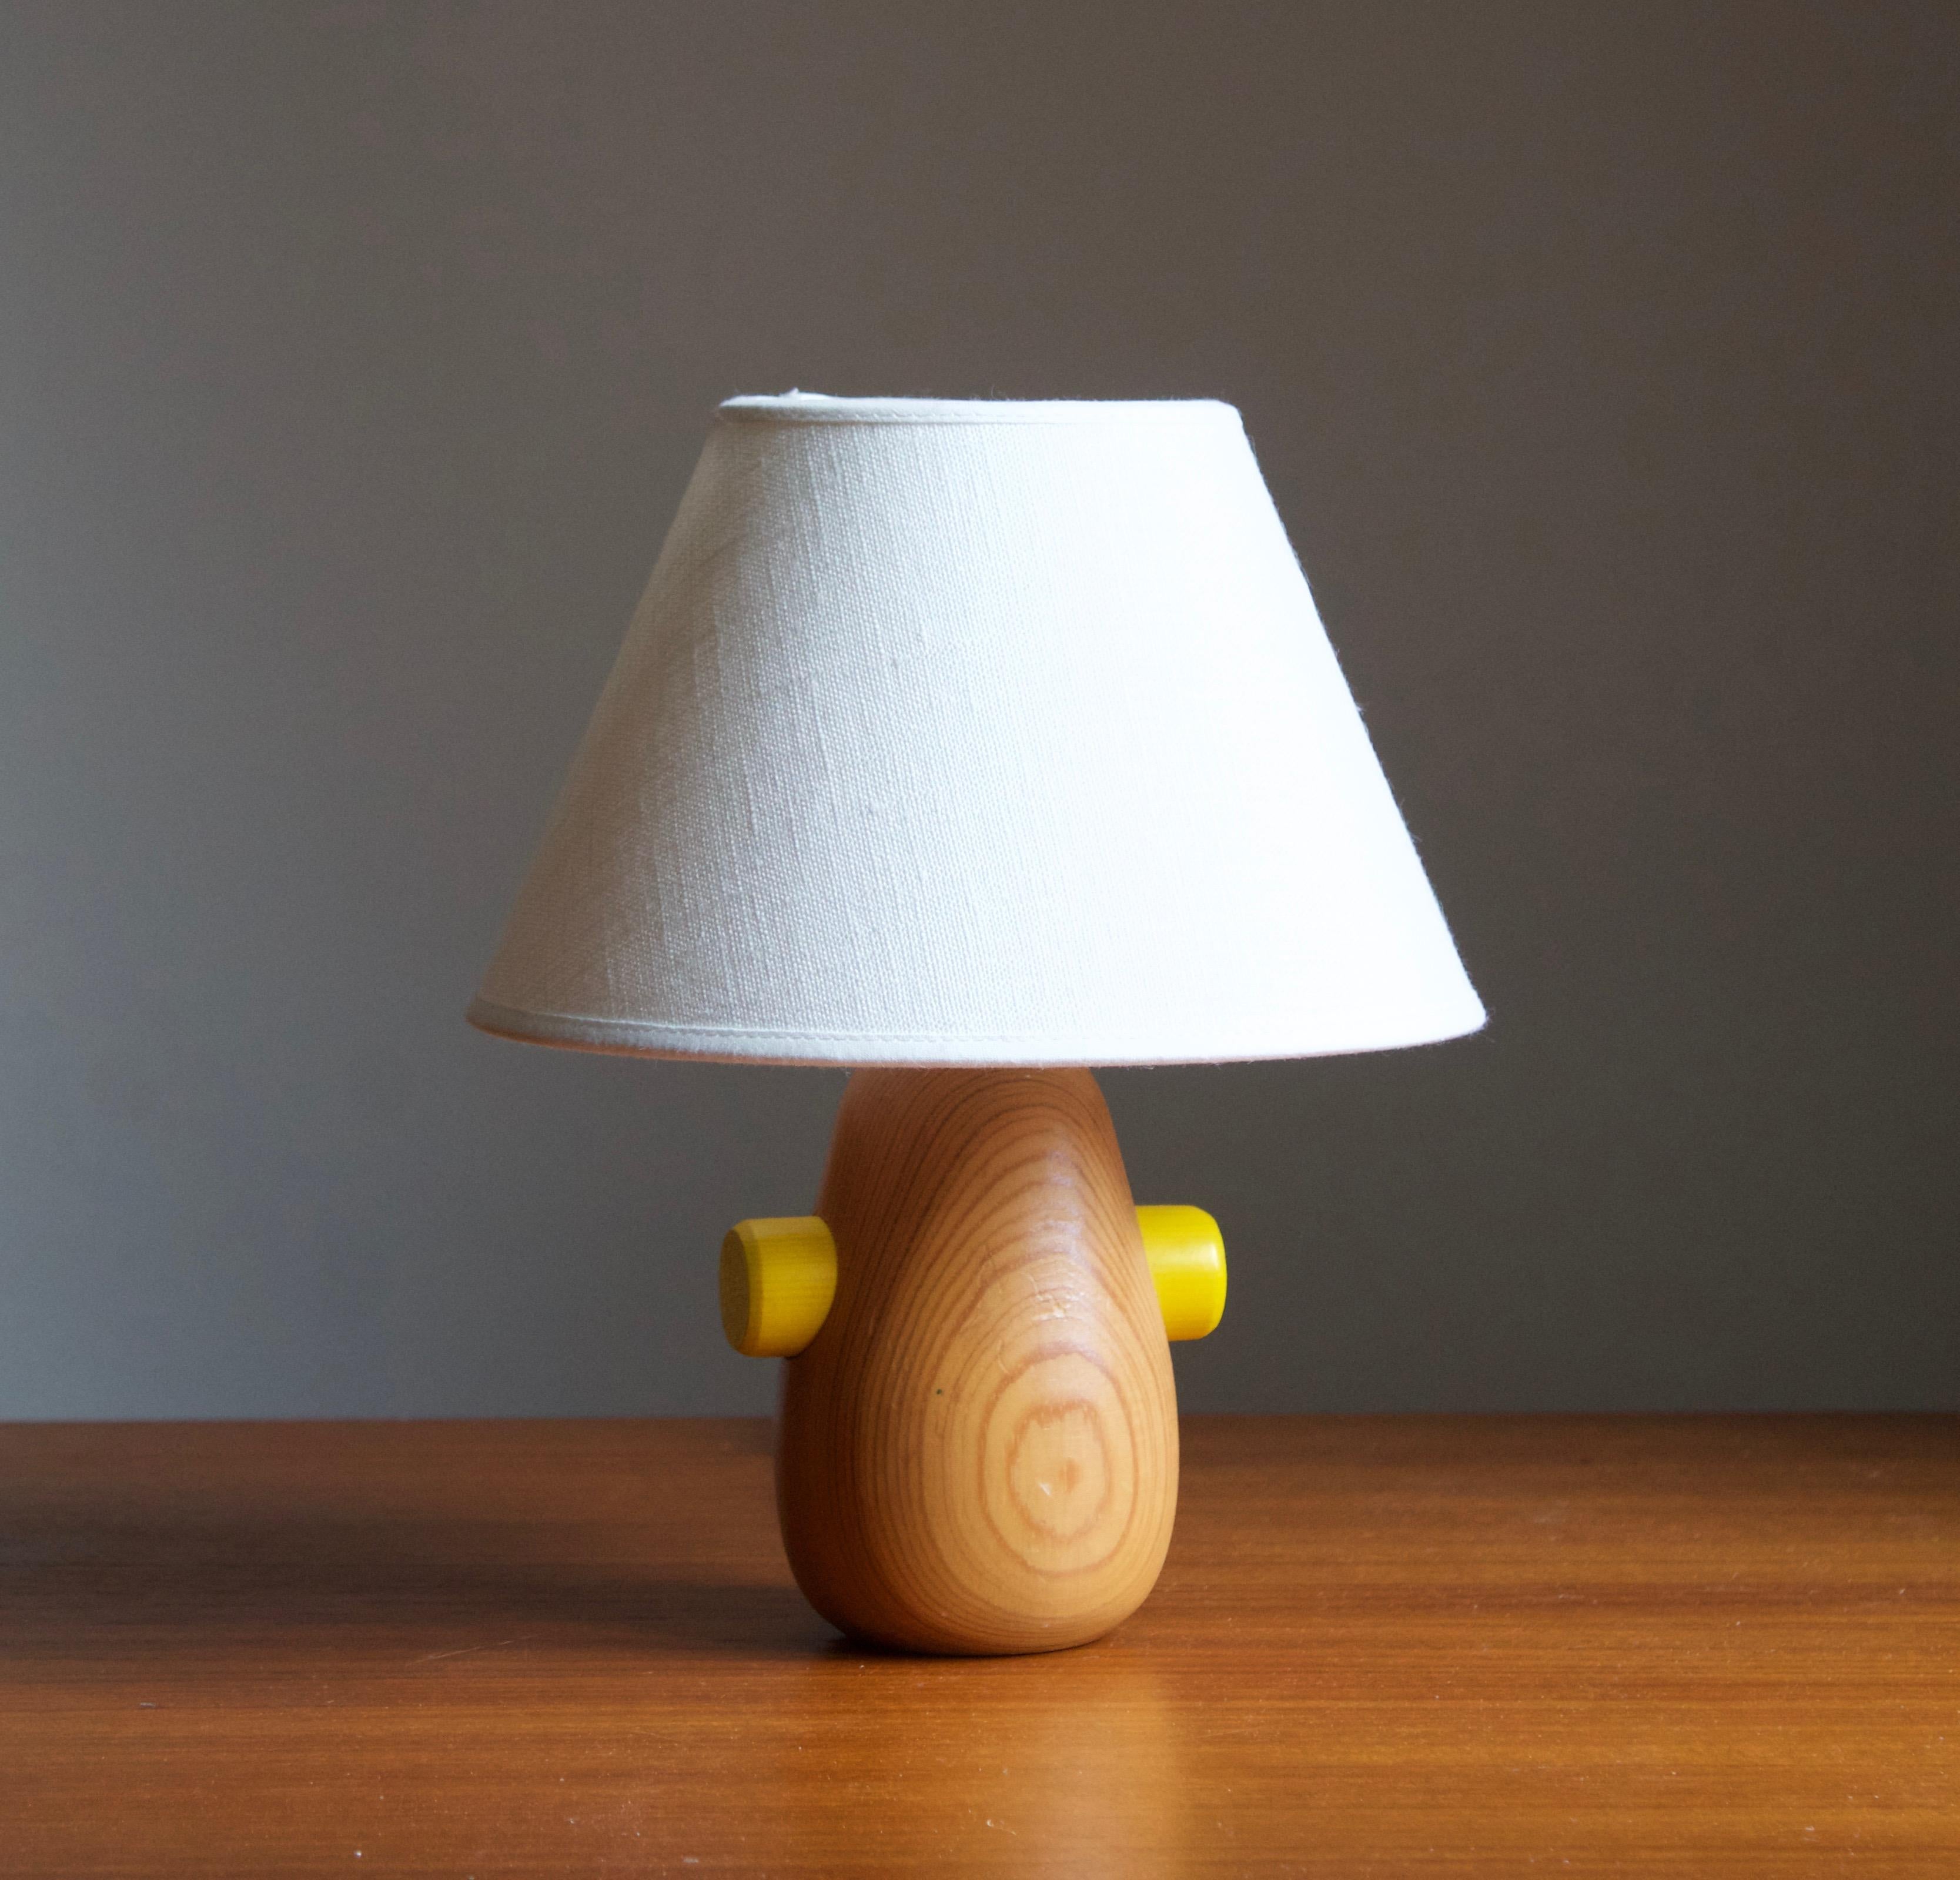 A small table lamp, designed and produced in Denmark, 1970s. 

Stated dimensions exclude lampshade. Sold without lampshade.